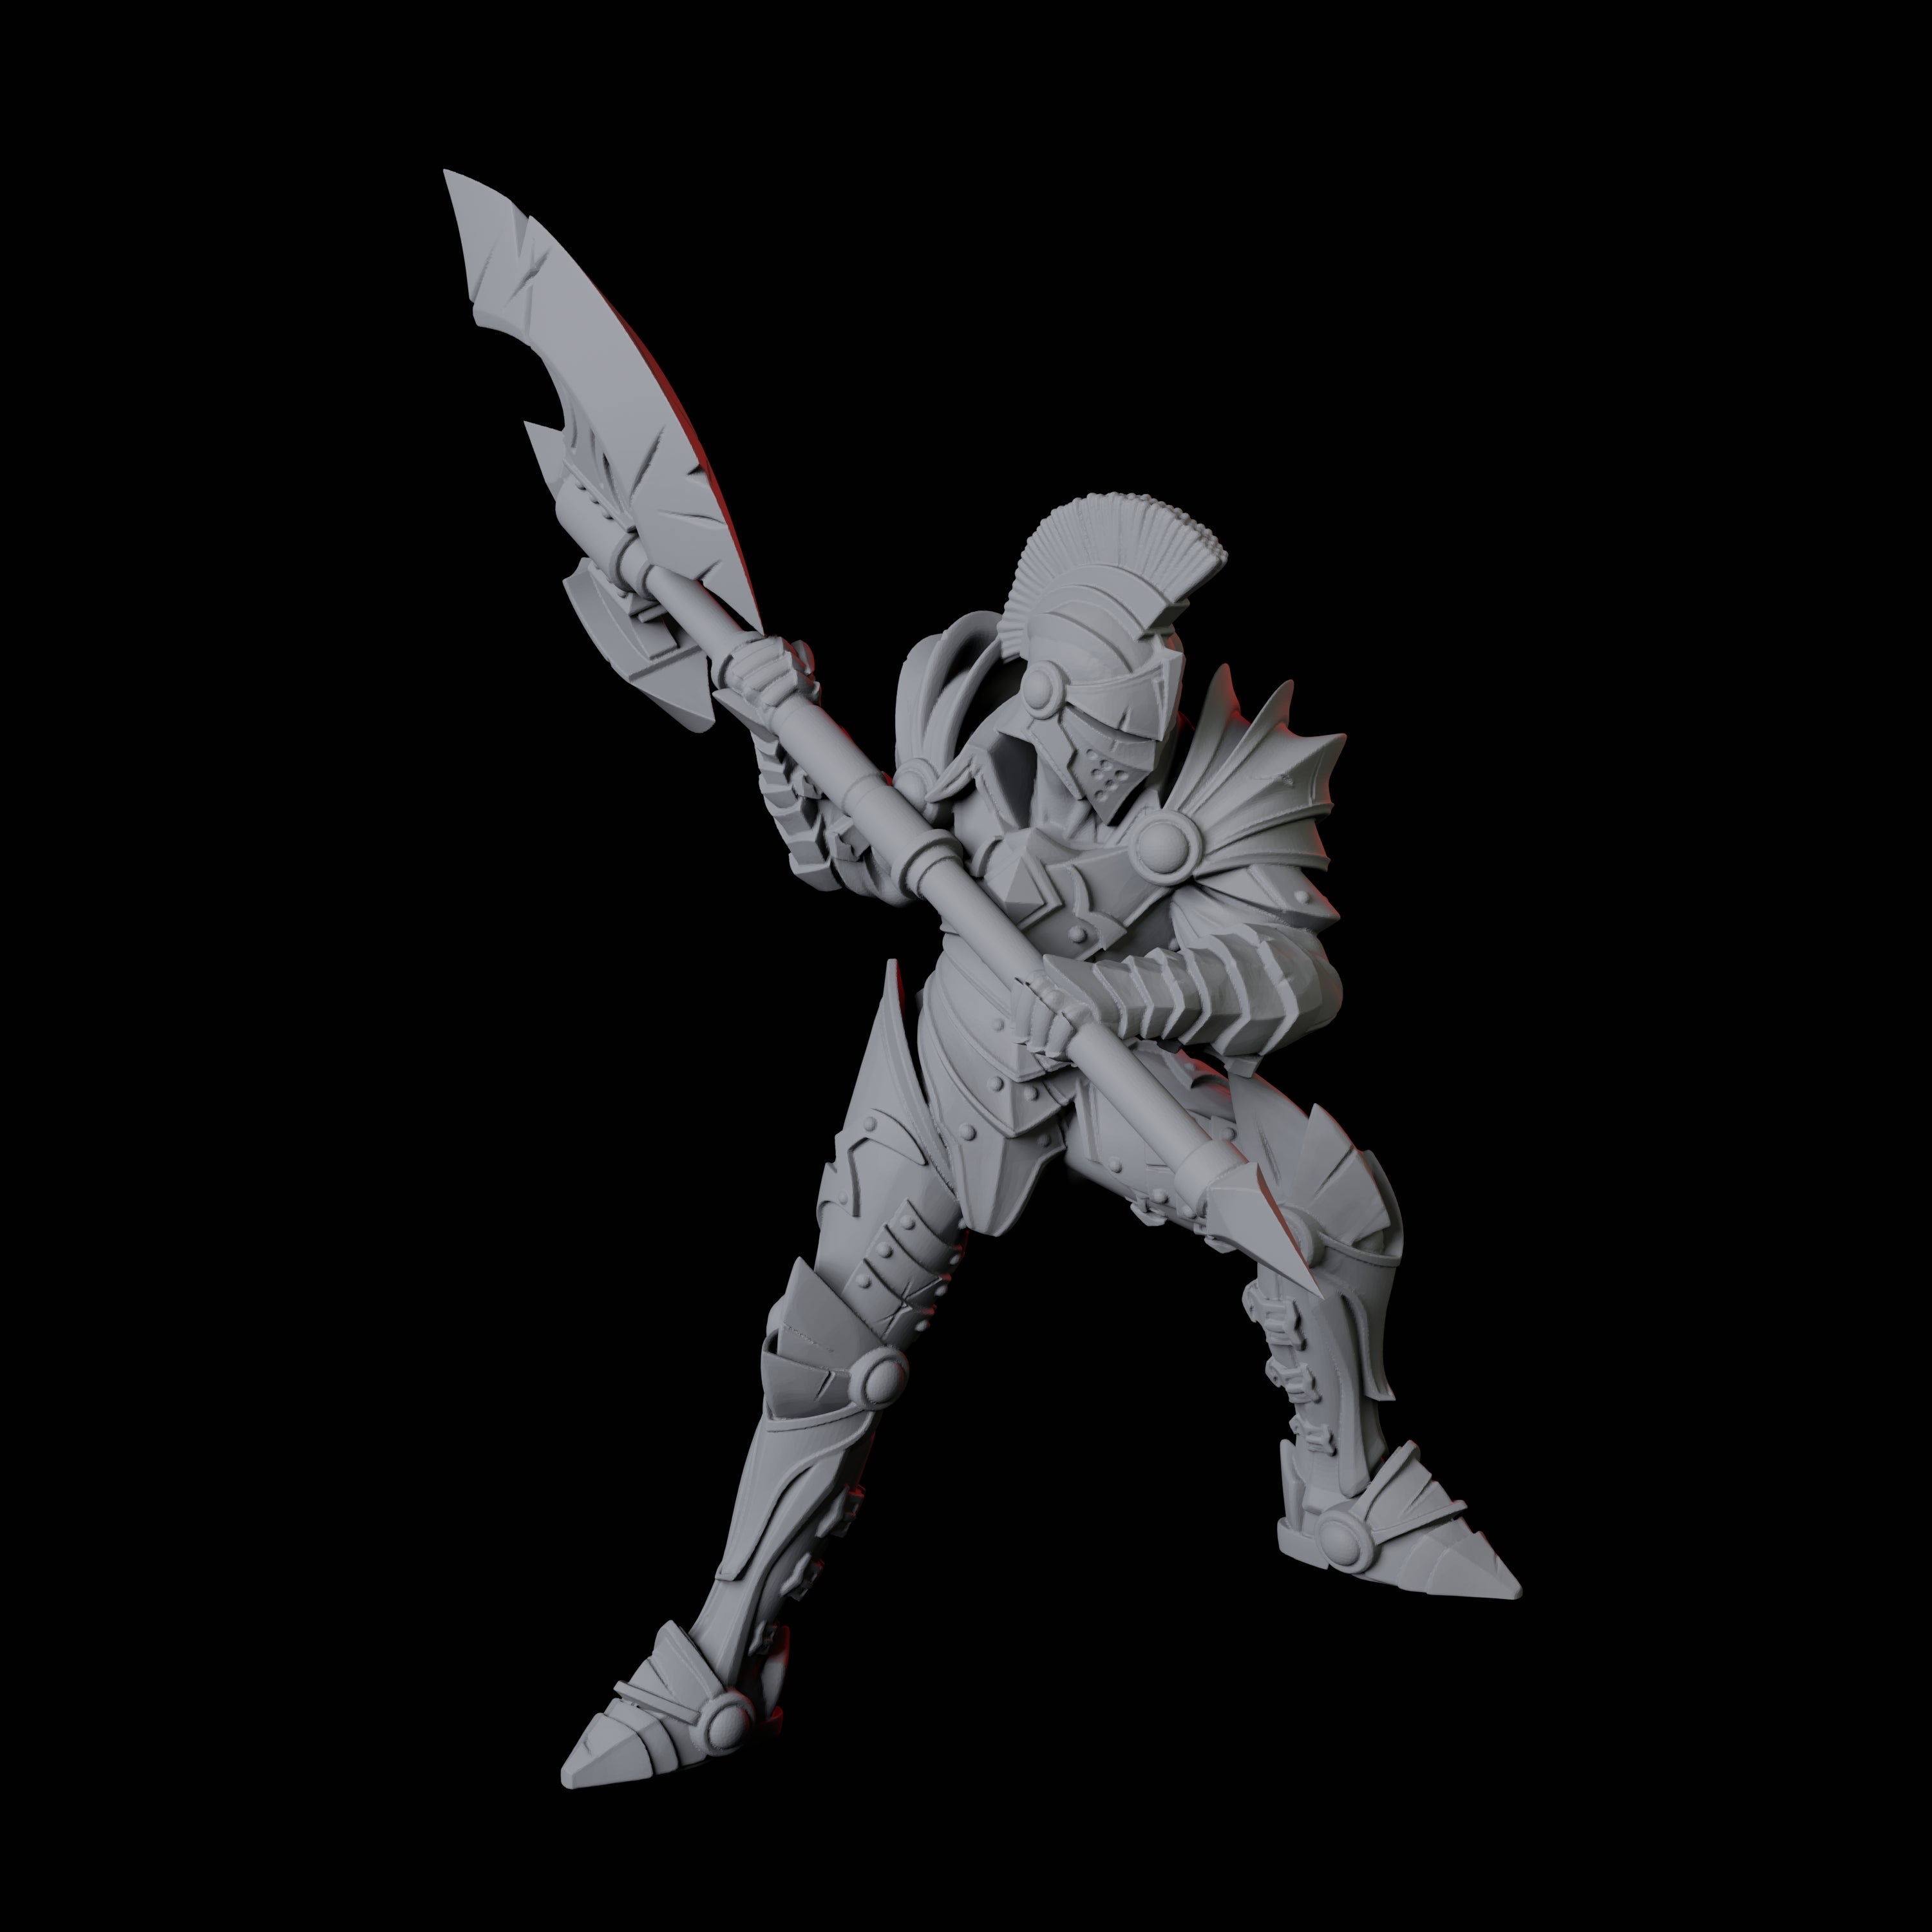 Axe-Wielding Knight C Miniature for Dungeons and Dragons, Pathfinder or other TTRPGs